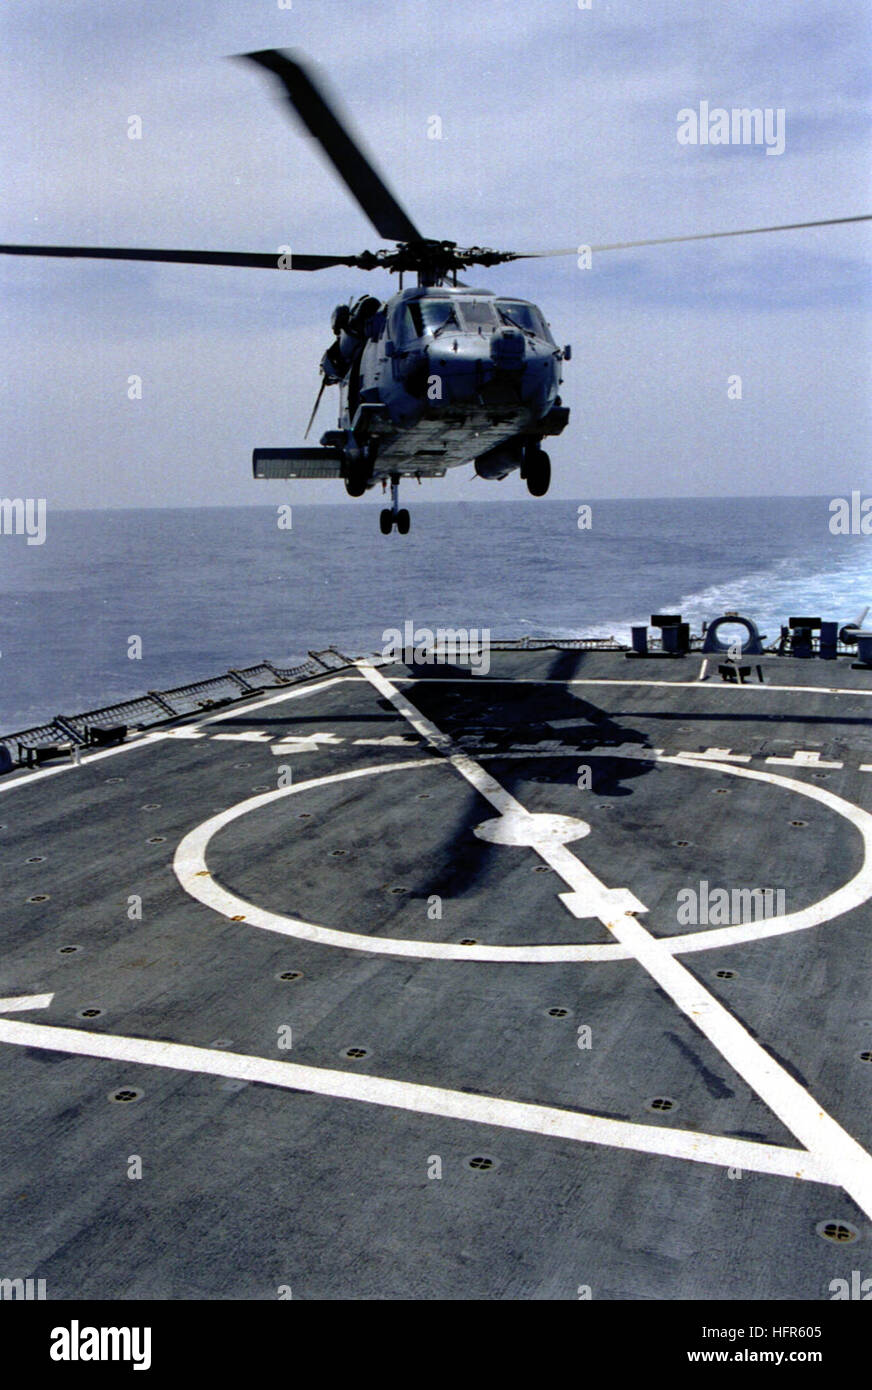 990608-N-8493H-001 At sea aboard USS Gonzalez (DDG 66) June 08,1999 -- An SH-60 'Seahawk' attached to Helicopter Squadron Three (HS-3) conducts deck landing qualifications (DLQ) aboard the USS Gonzalez.  USS Gonzalez, USS Theodore Roosevelt, and supporting airwing are operating in the Adriatic Sea in support of the NATO led Operation Allied Force.  U.S. Navy photo by PhotographerÕs Mate 2nd Class Steven Harbour. (RELEASED) US Navy 990608-N-8493H-001 SH-60 Seahawk conducts deck landing qualifications Stock Photo